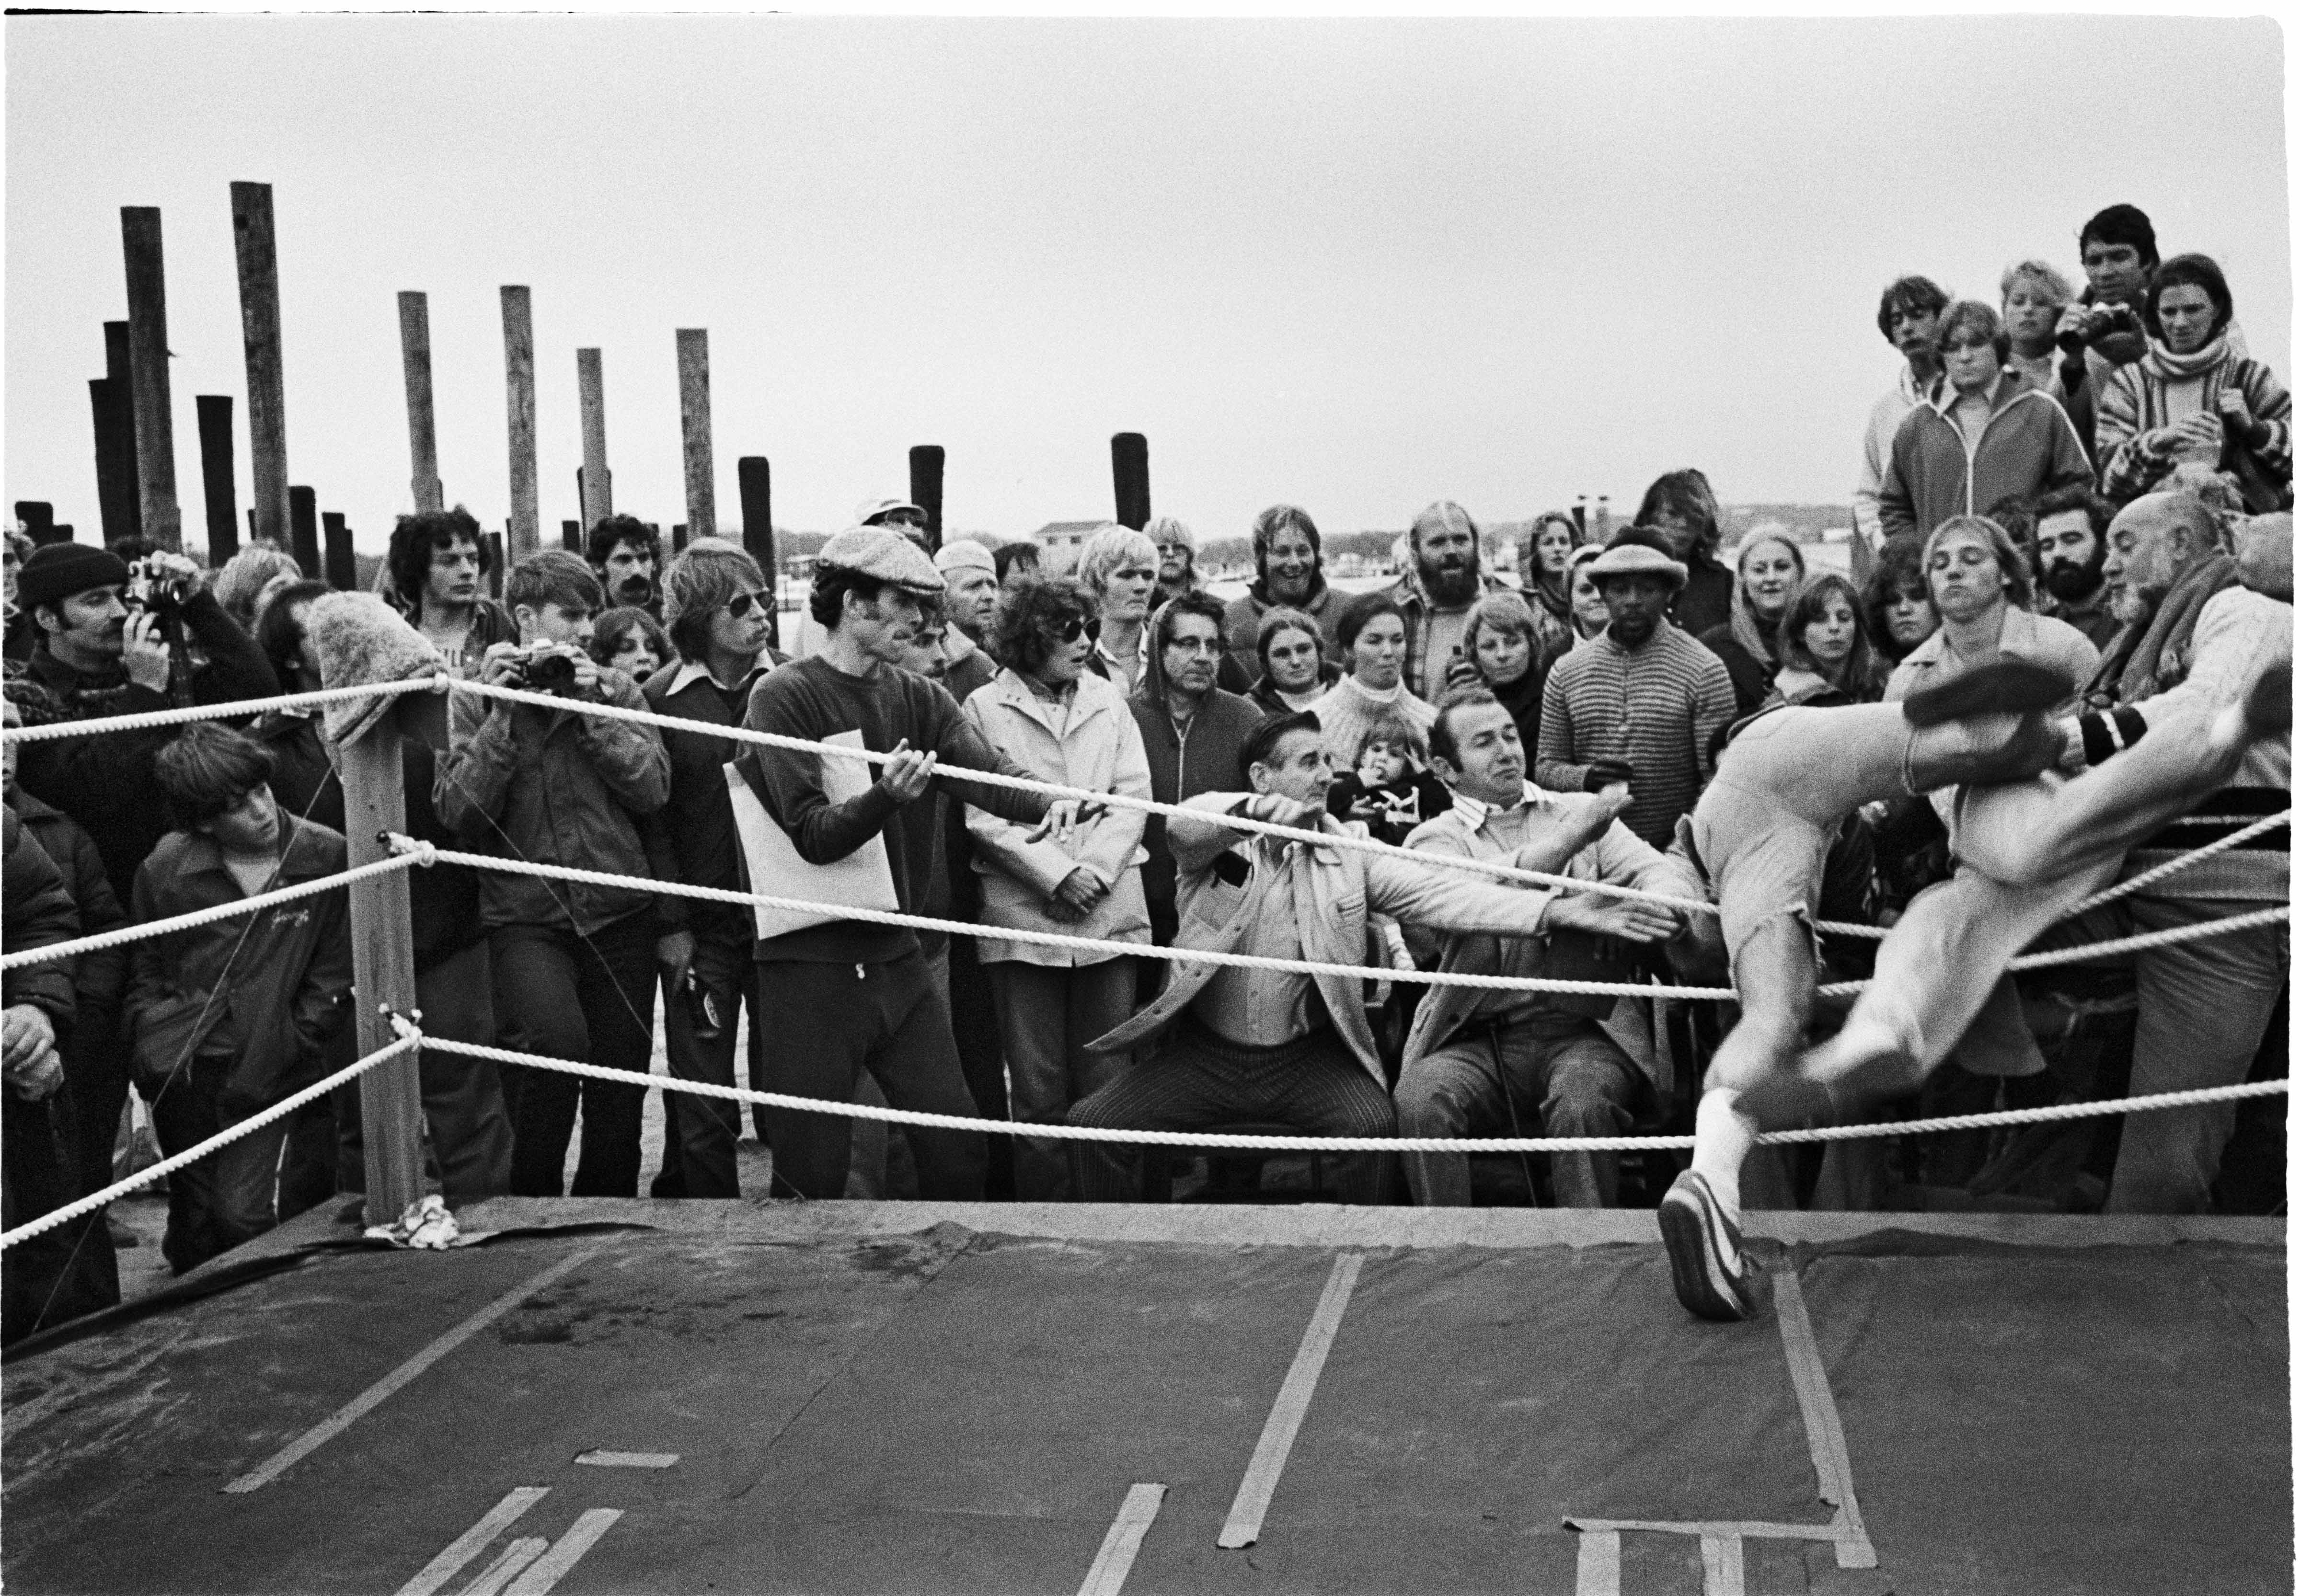 Steve Houseknecht and Mike Ushko going through the ropes. Fight judge, Pat Sweeney, seated center. Photo: Tom Watson